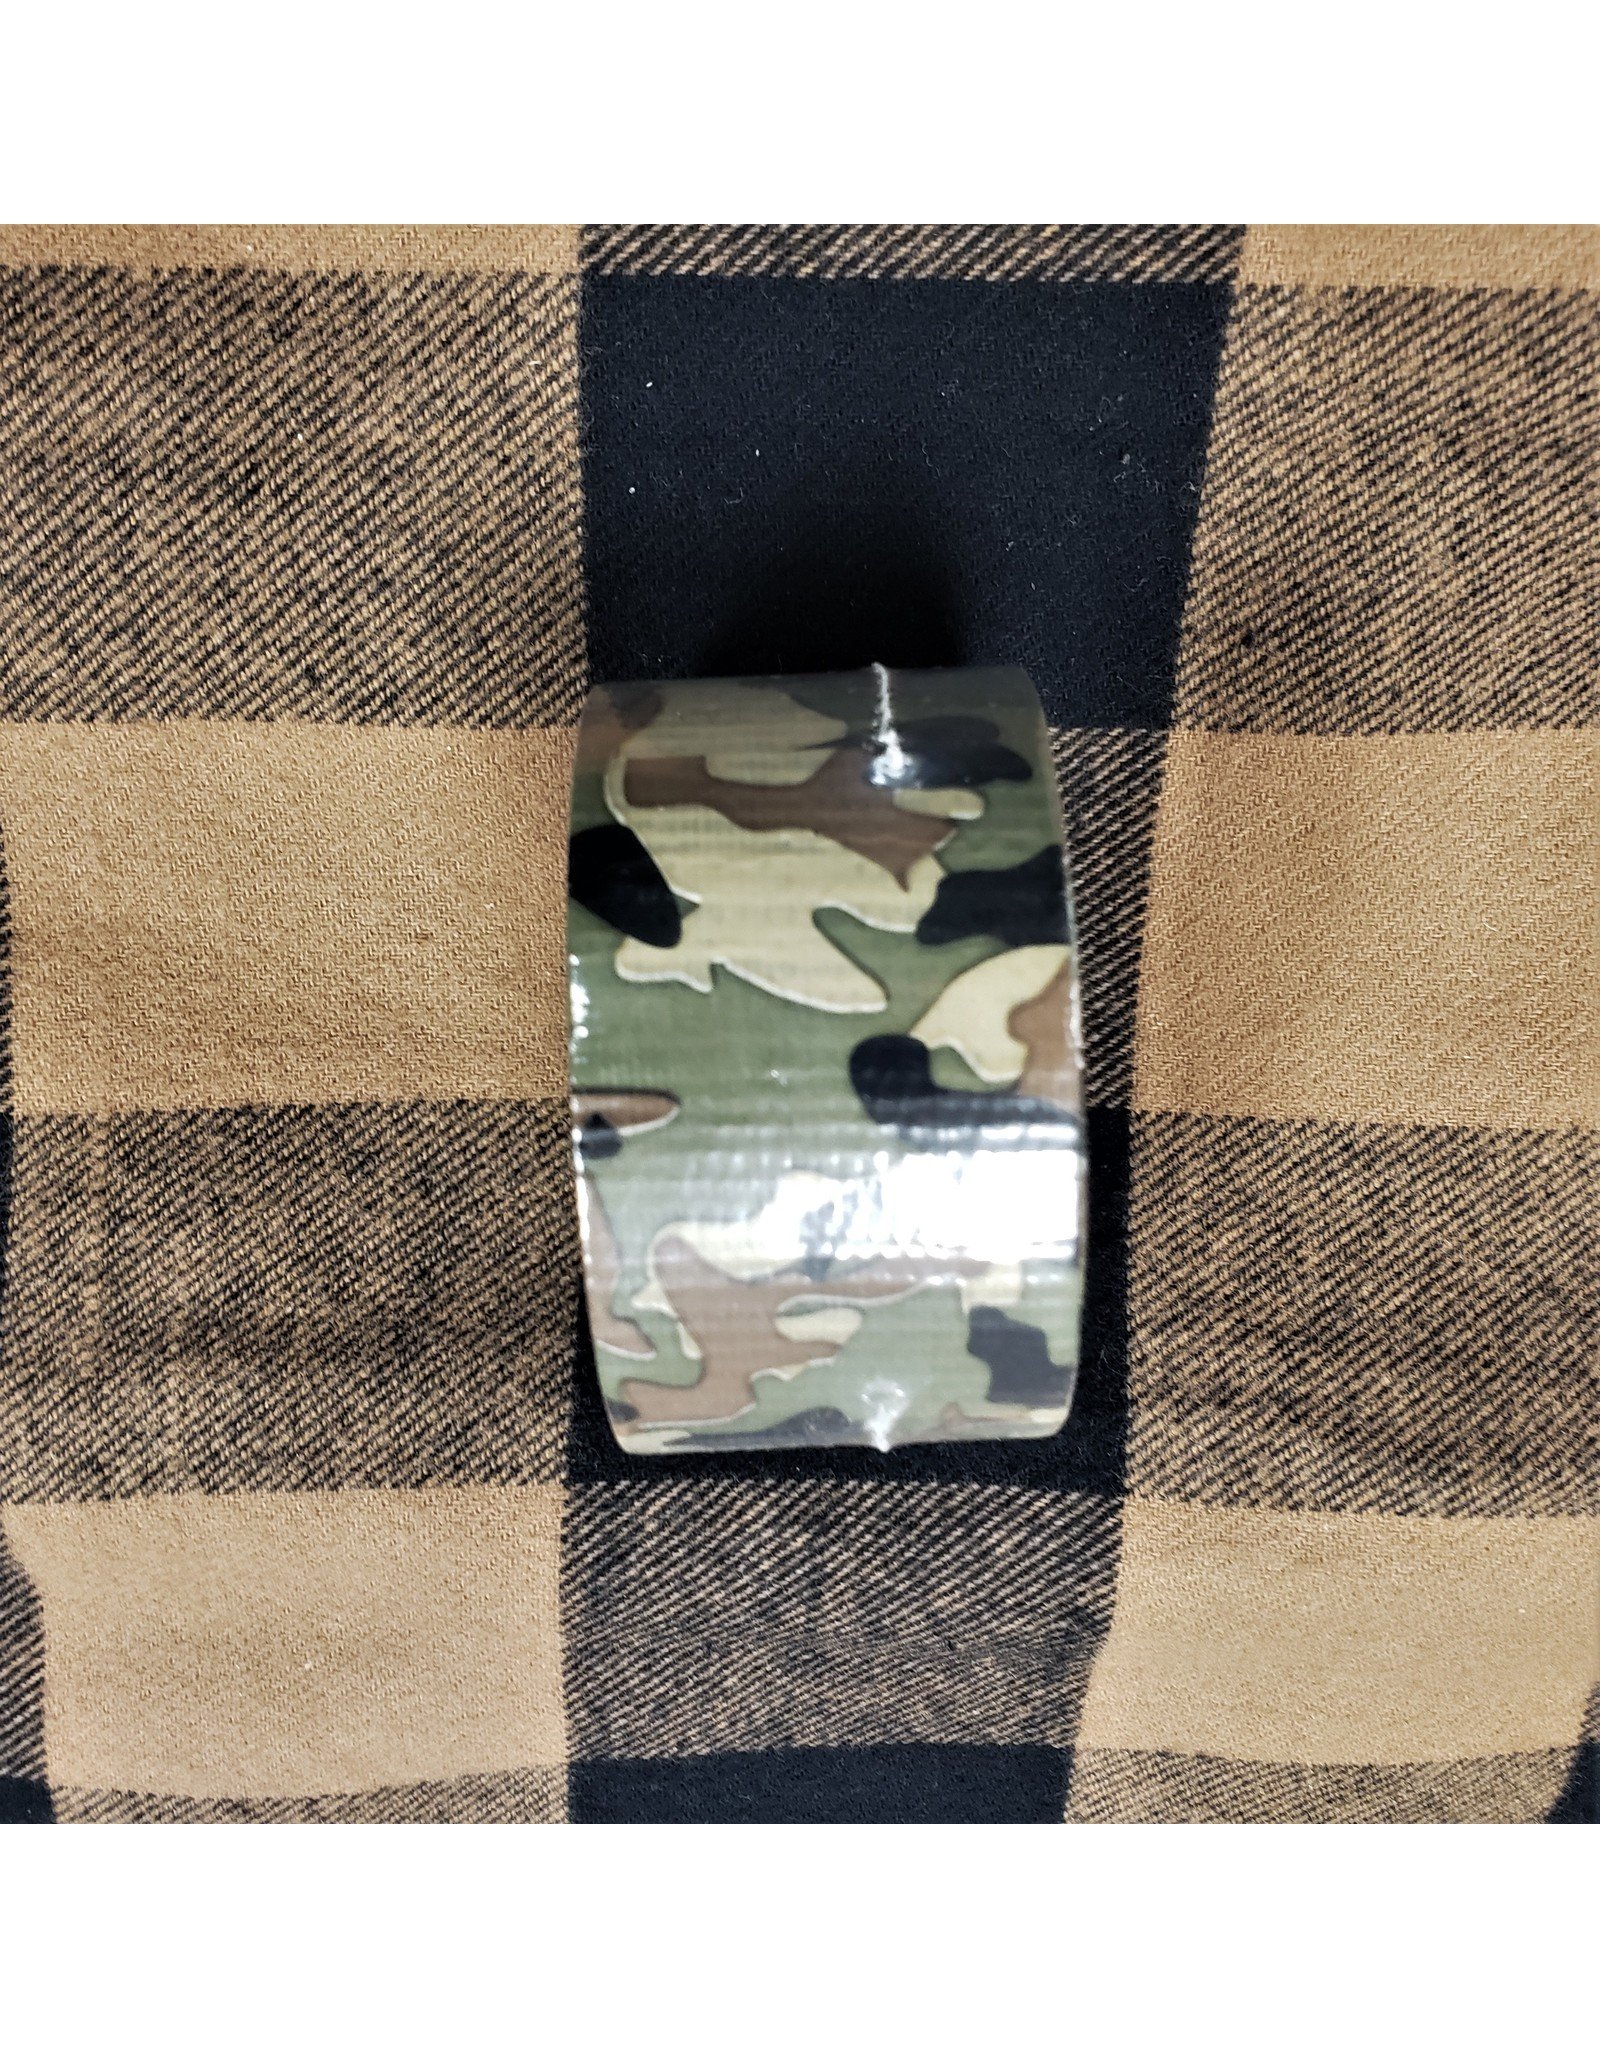 FOX TACTICAL GEAR FOX TACTICAL CAMOUFLAGE DUCT TAPE 1.88IN X 10YD - 7010